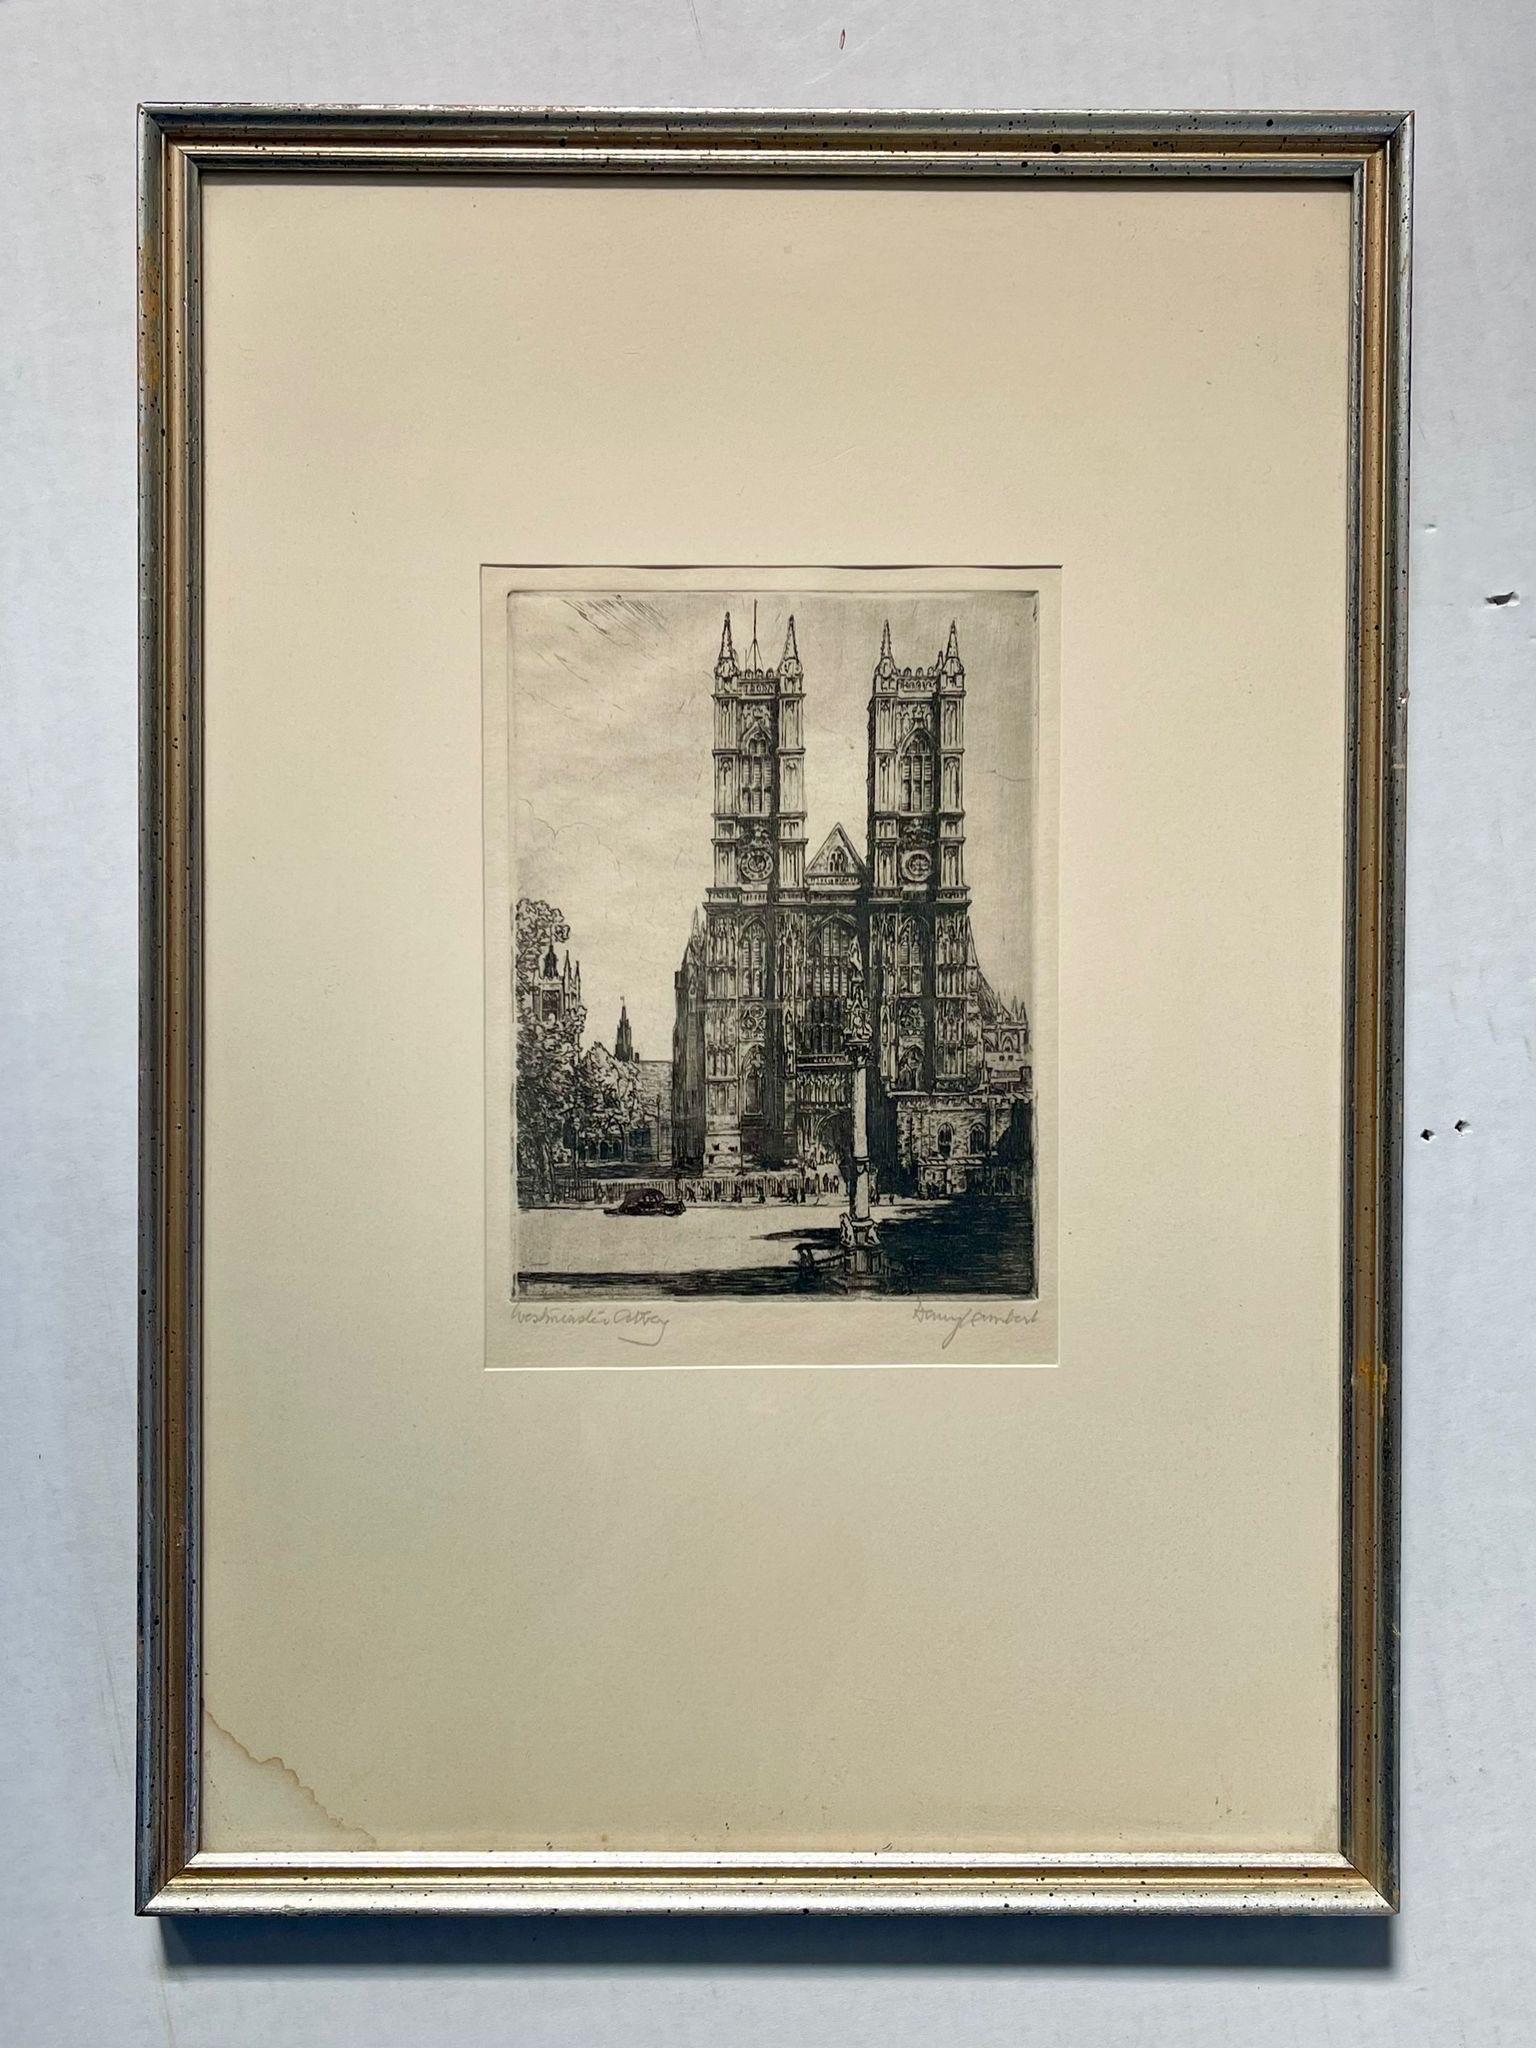 This print is framed and matted, signed and title in the lower corner. Frame is silver and gold toned. Vintage Condition Consistent with Age as Pictured.

Dimensions. 12 W ; 1/2 D ; 17 H